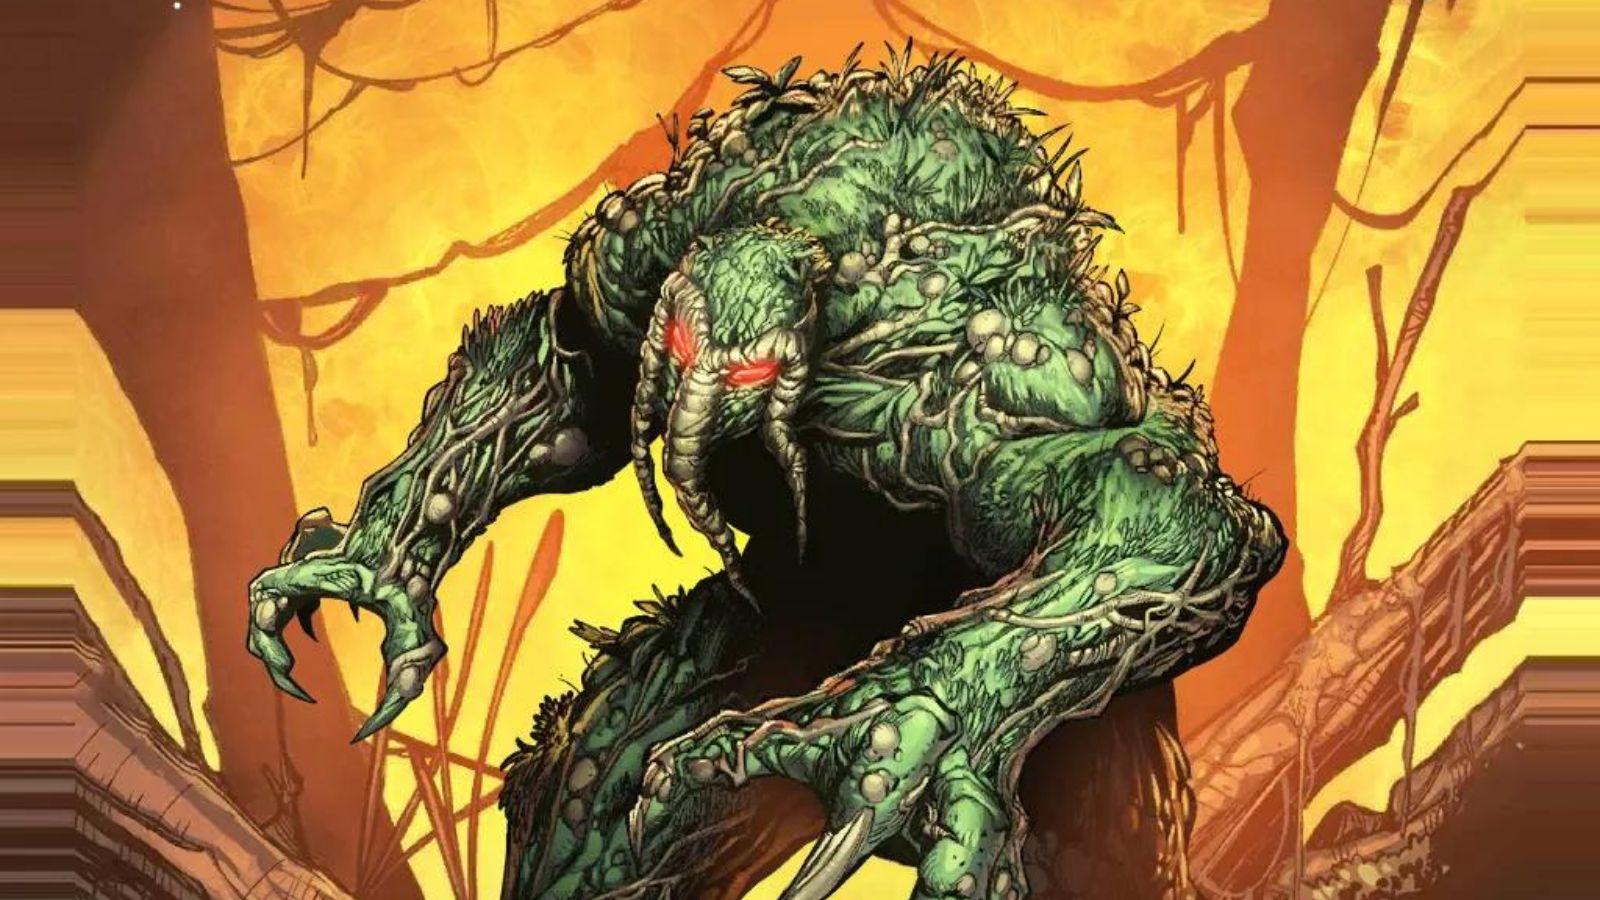 Marvel Snap adds Werewolf by Night and Man-Thing in October